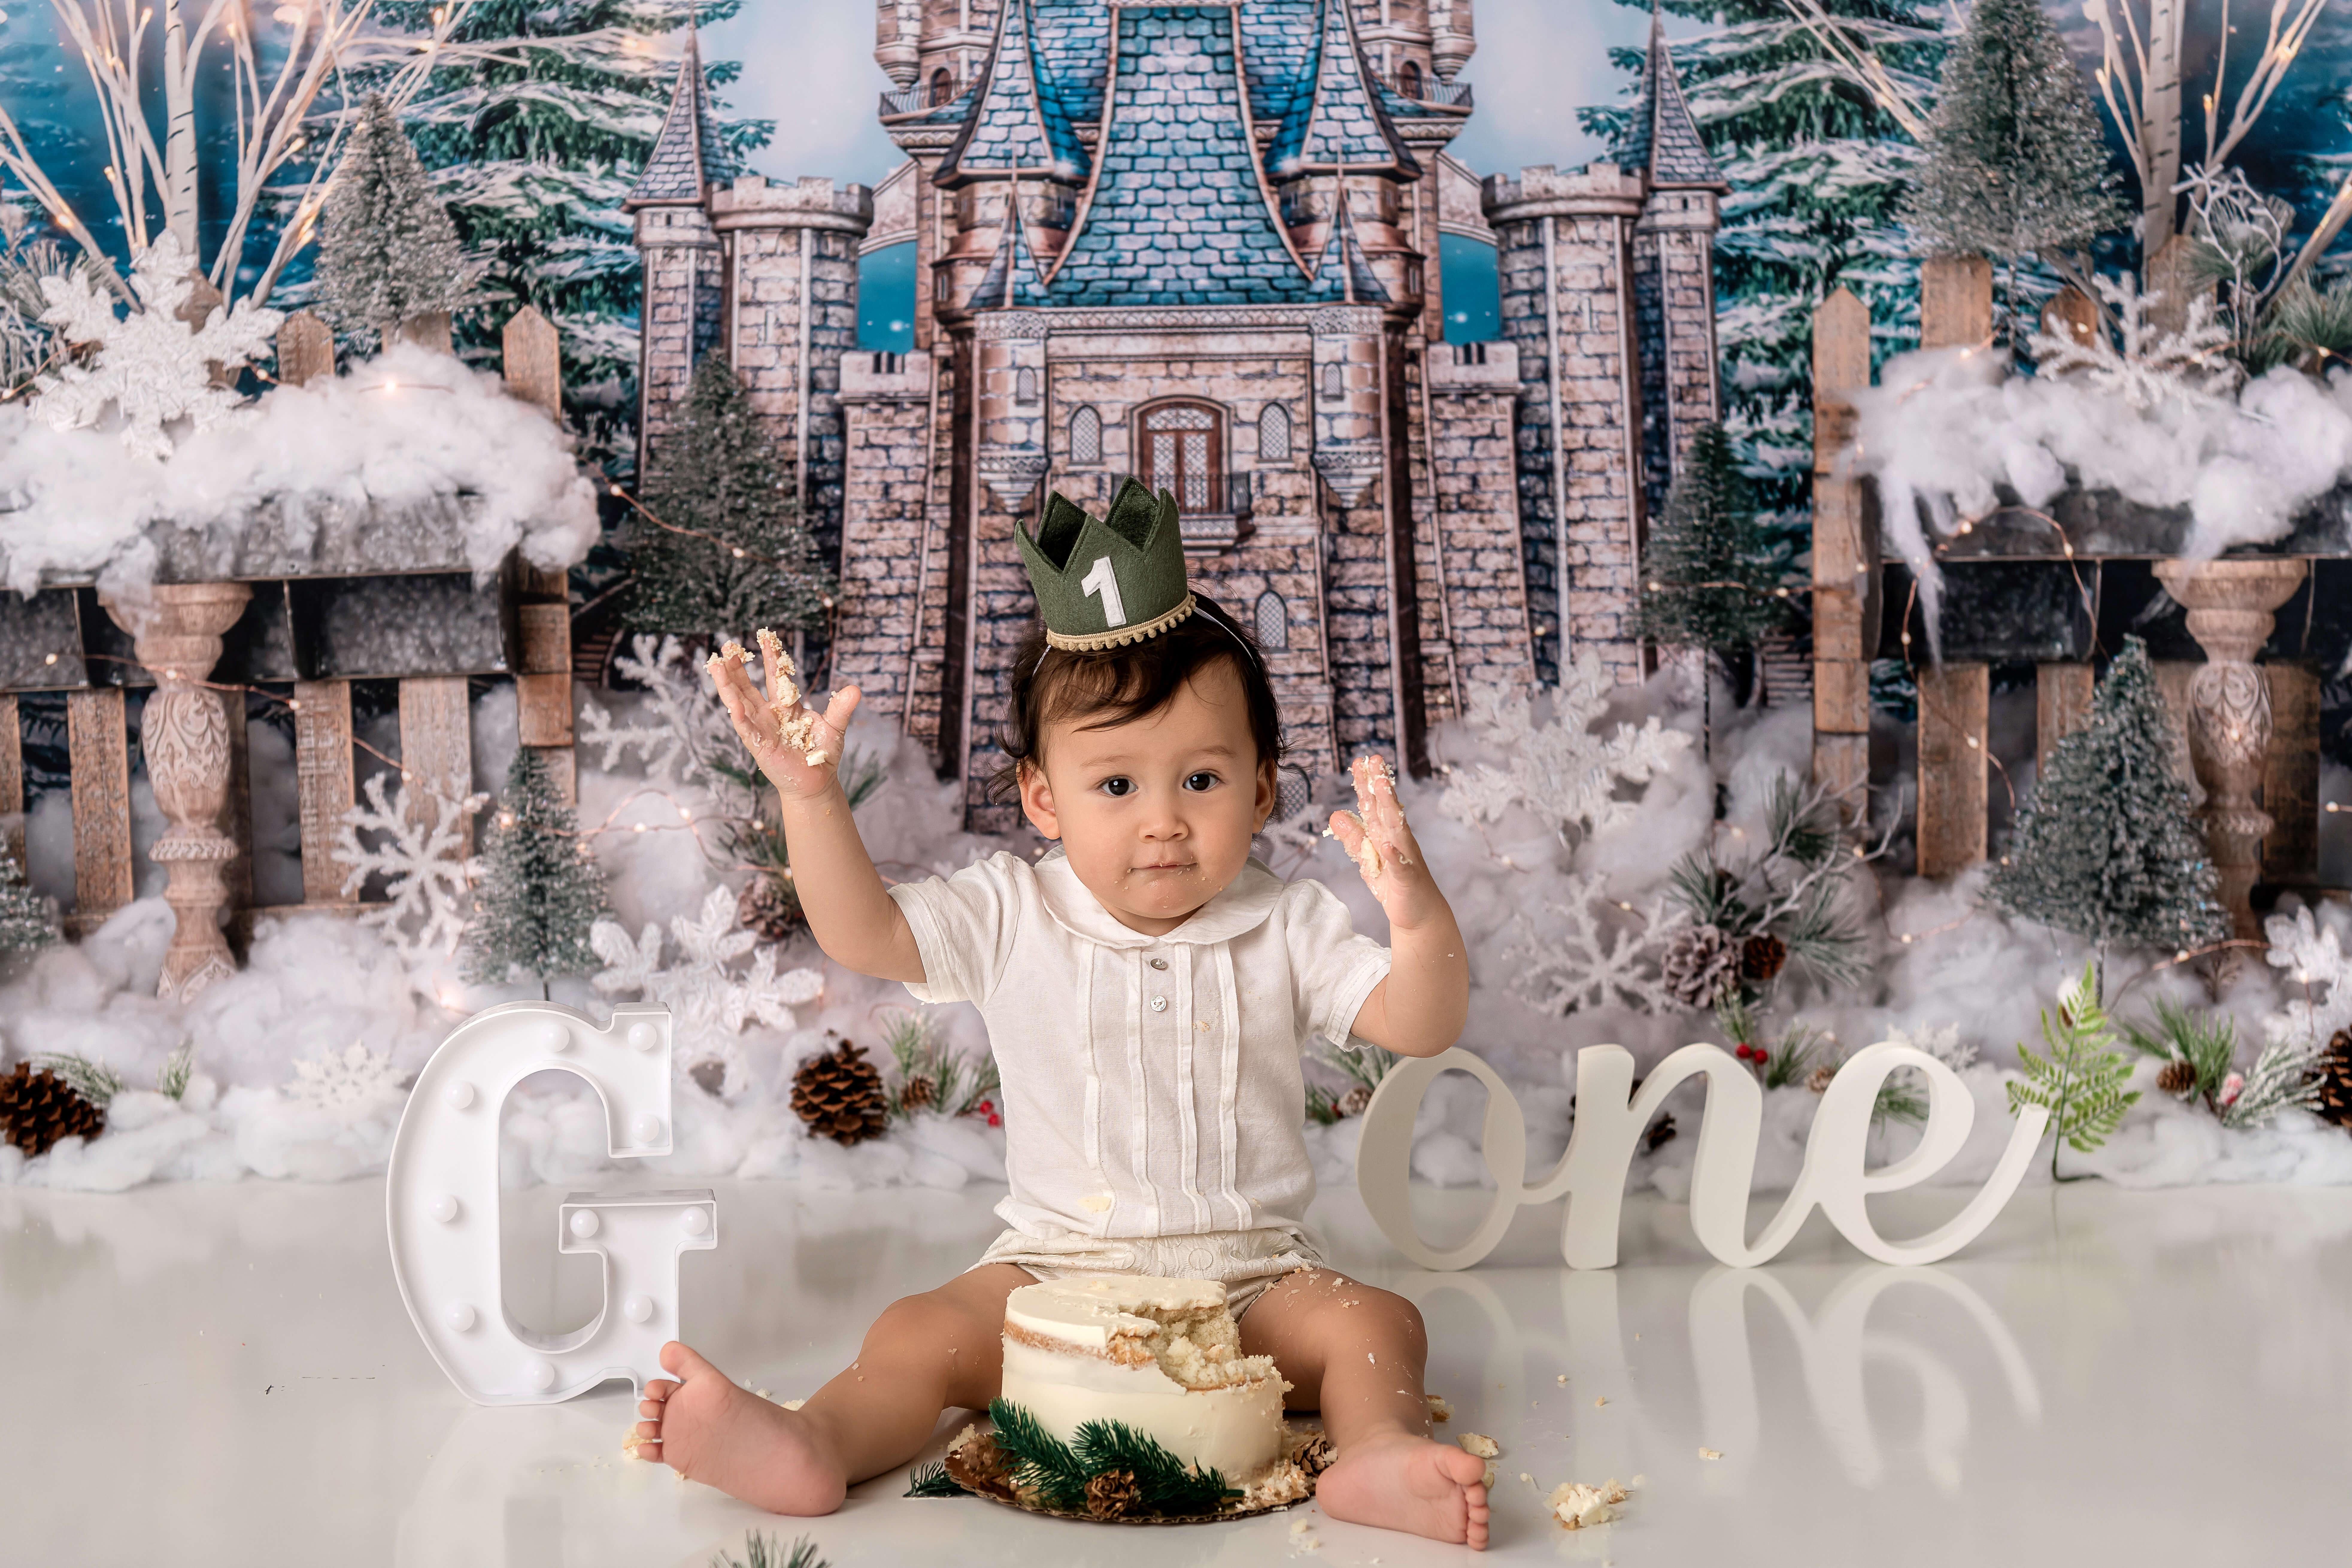 Baby boy holding his hands up in the air for his cake smash photo shoot